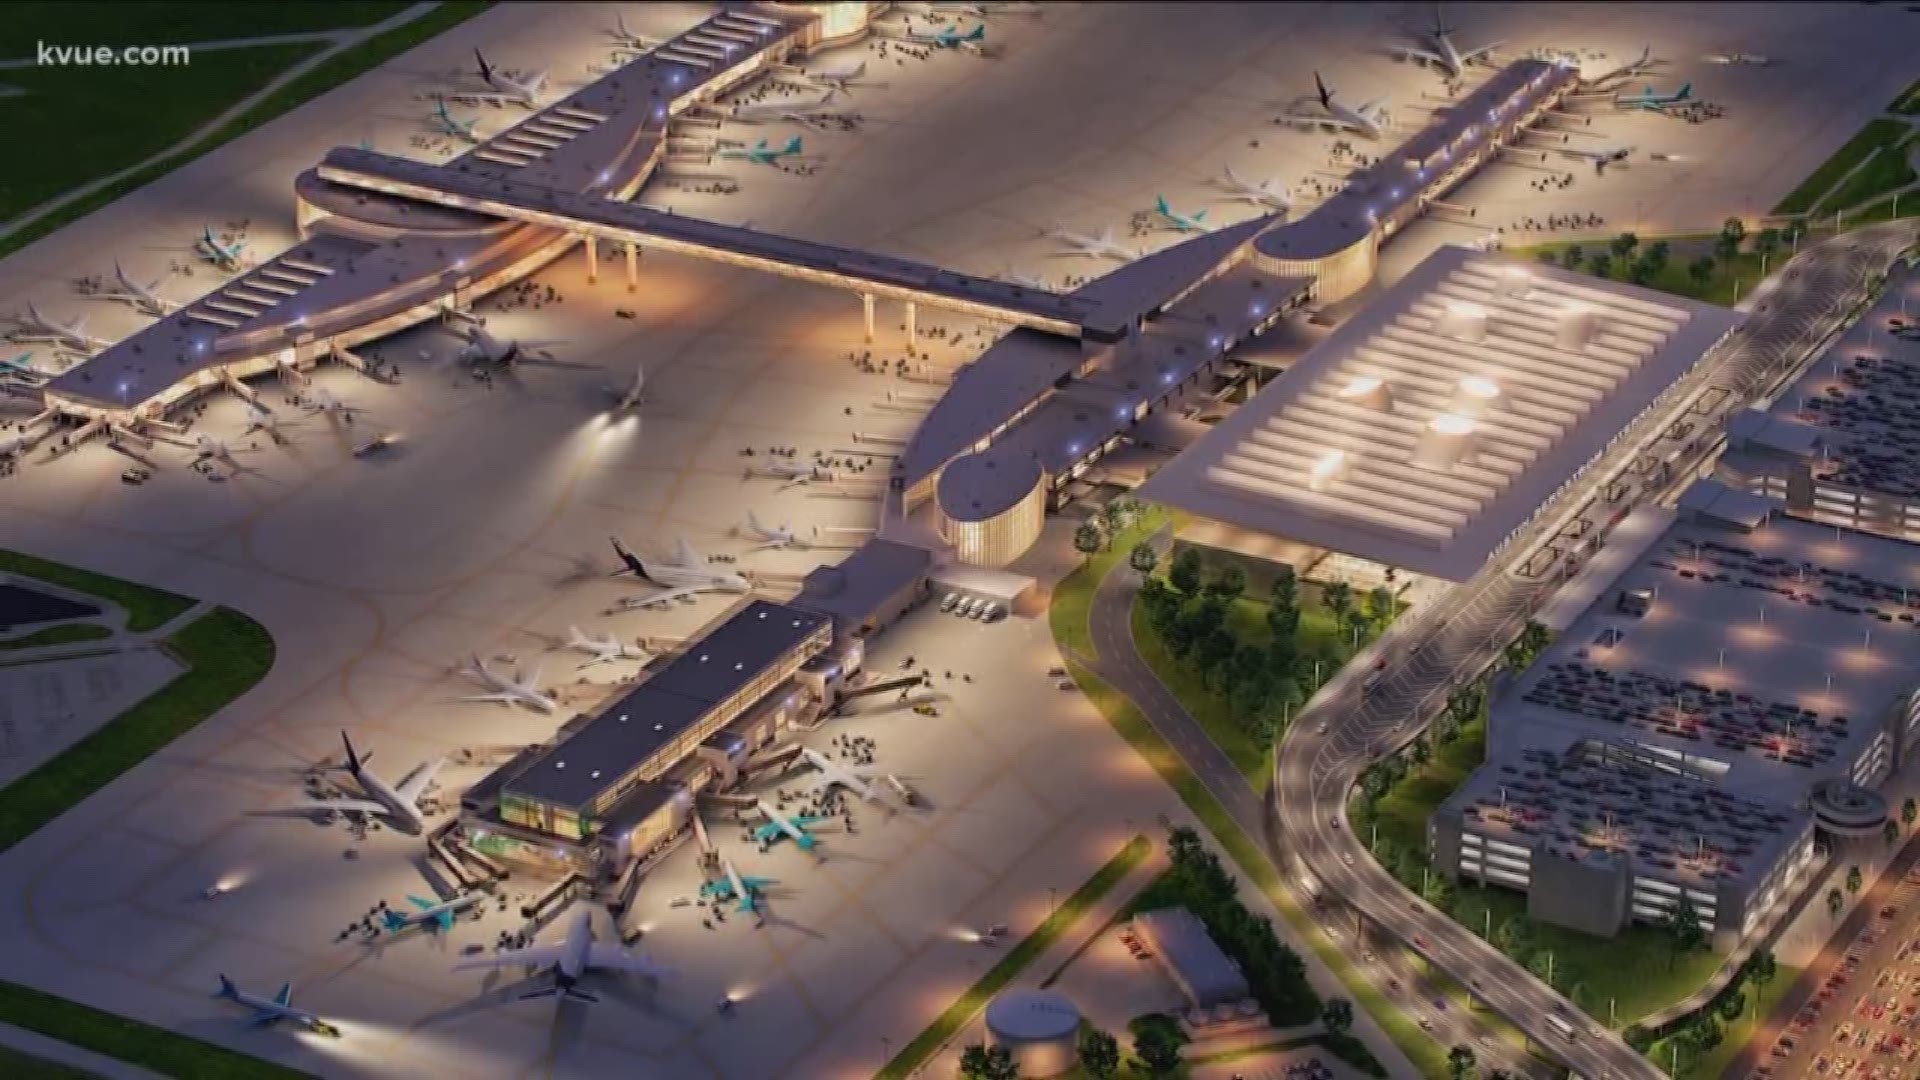 By 2040, the plan is to equip the airport to handle up to 40 million flyers per year.